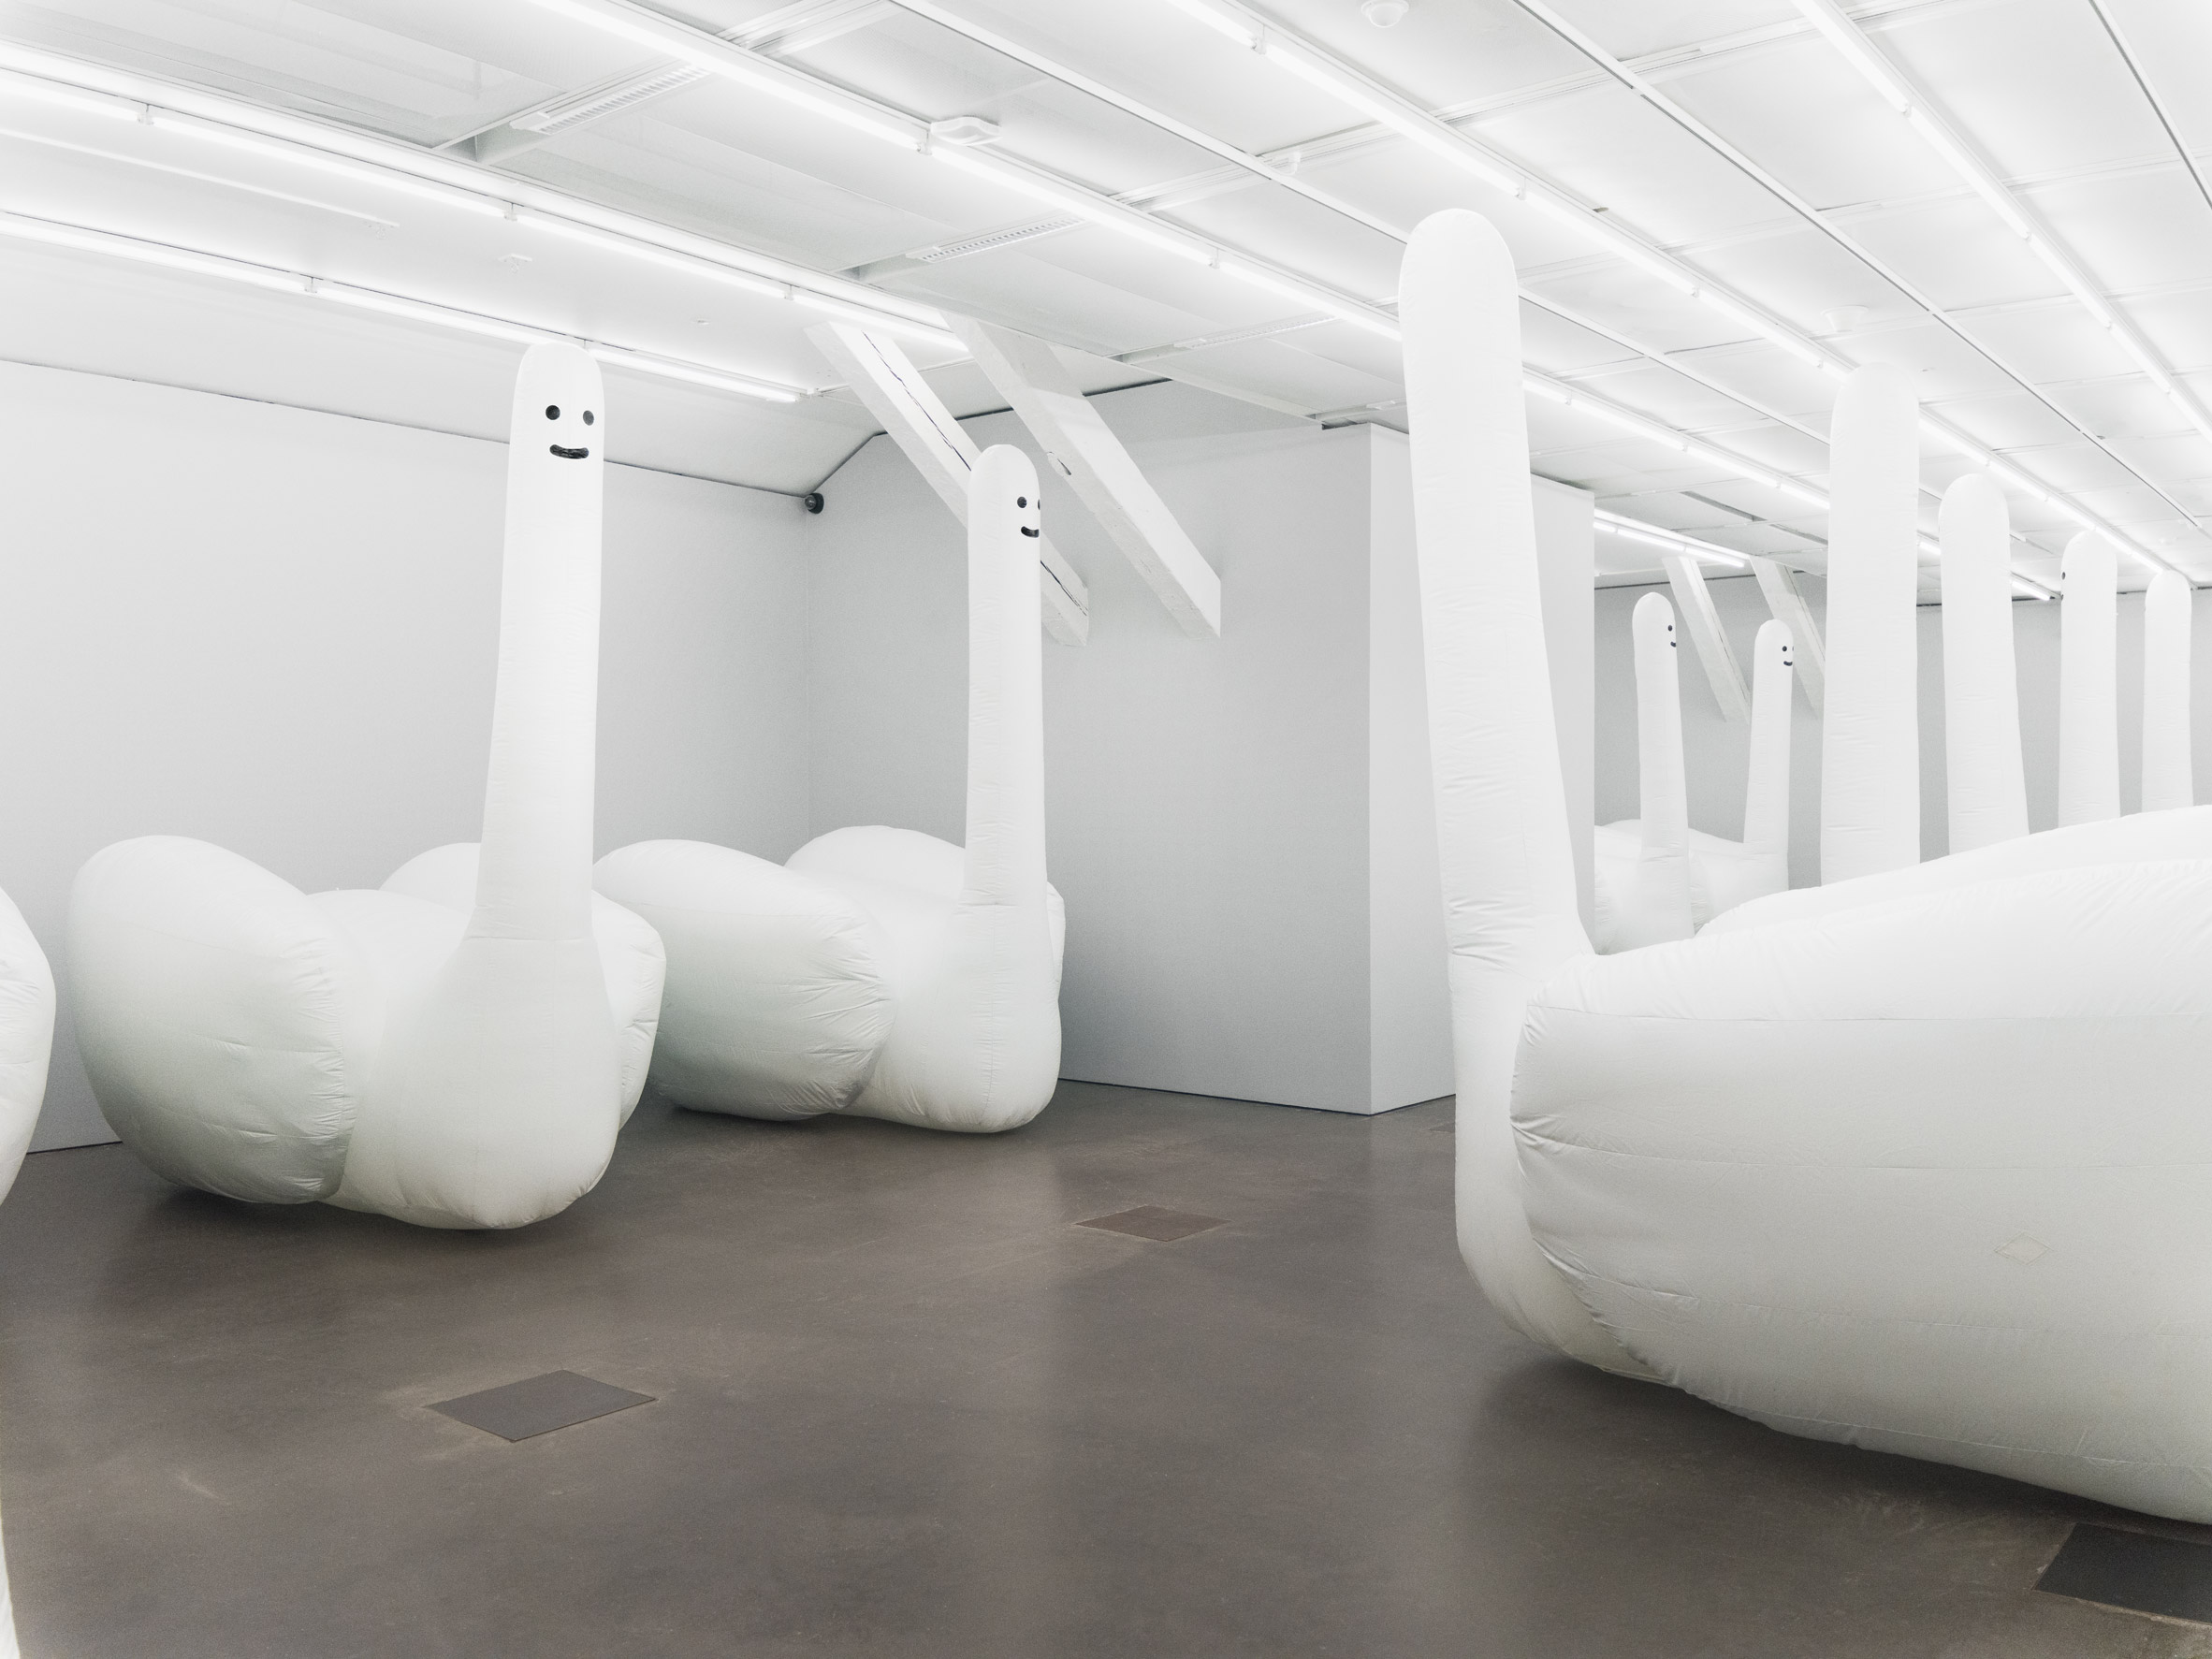 David Shrigley's inflatable "swan-things" spring to life in 12 minute cycles